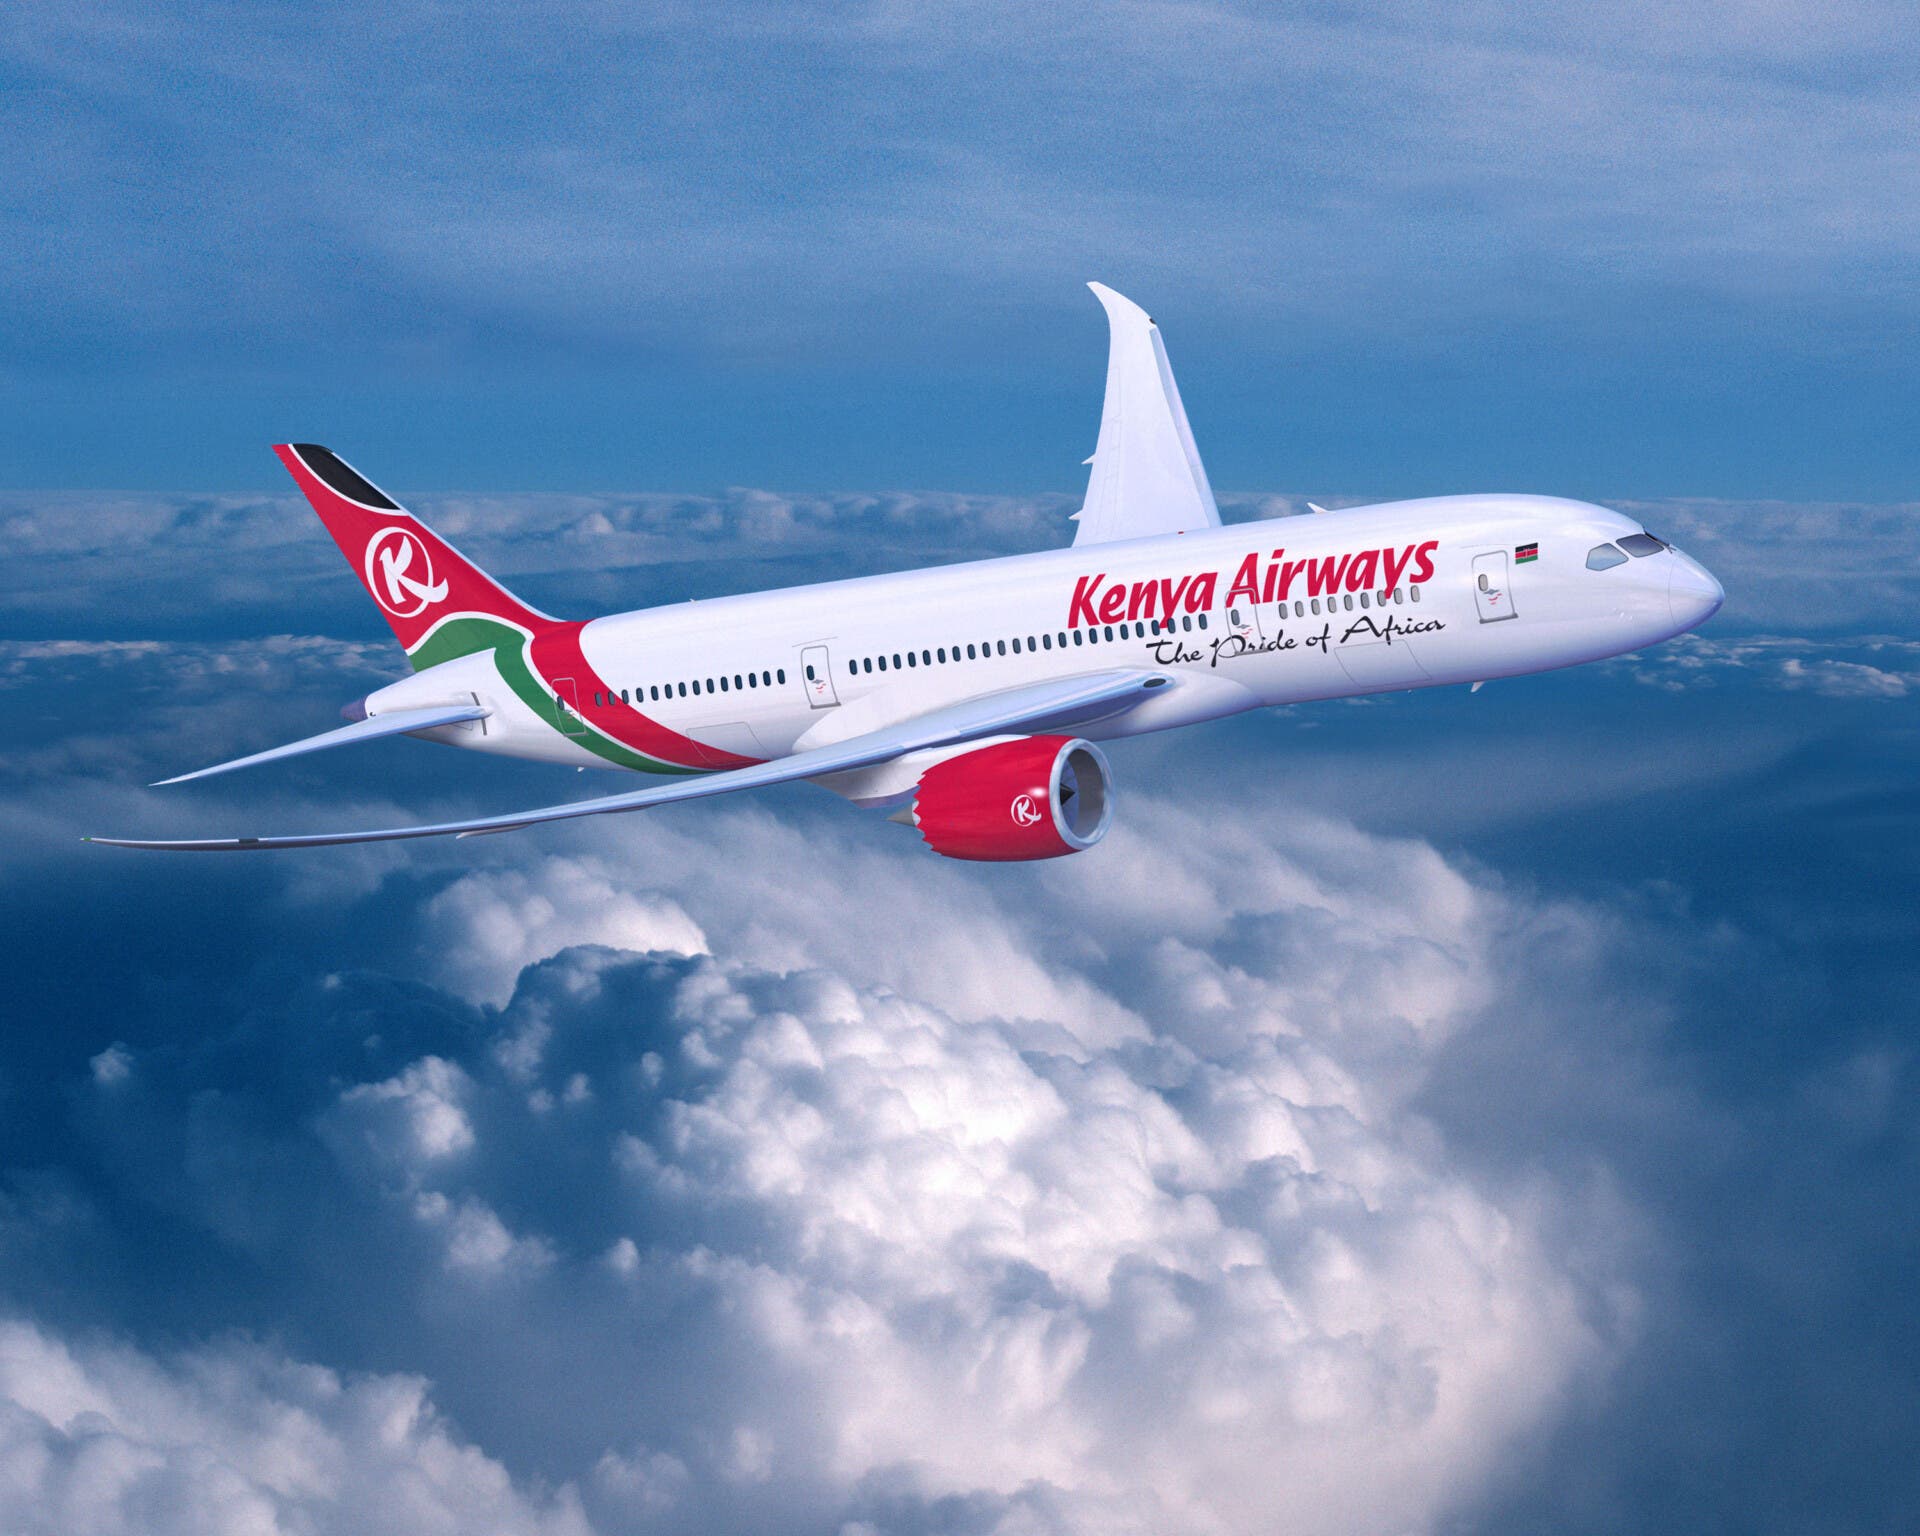 Kenya Airways Under Fire From Pilots For Flying 787s Too Fast